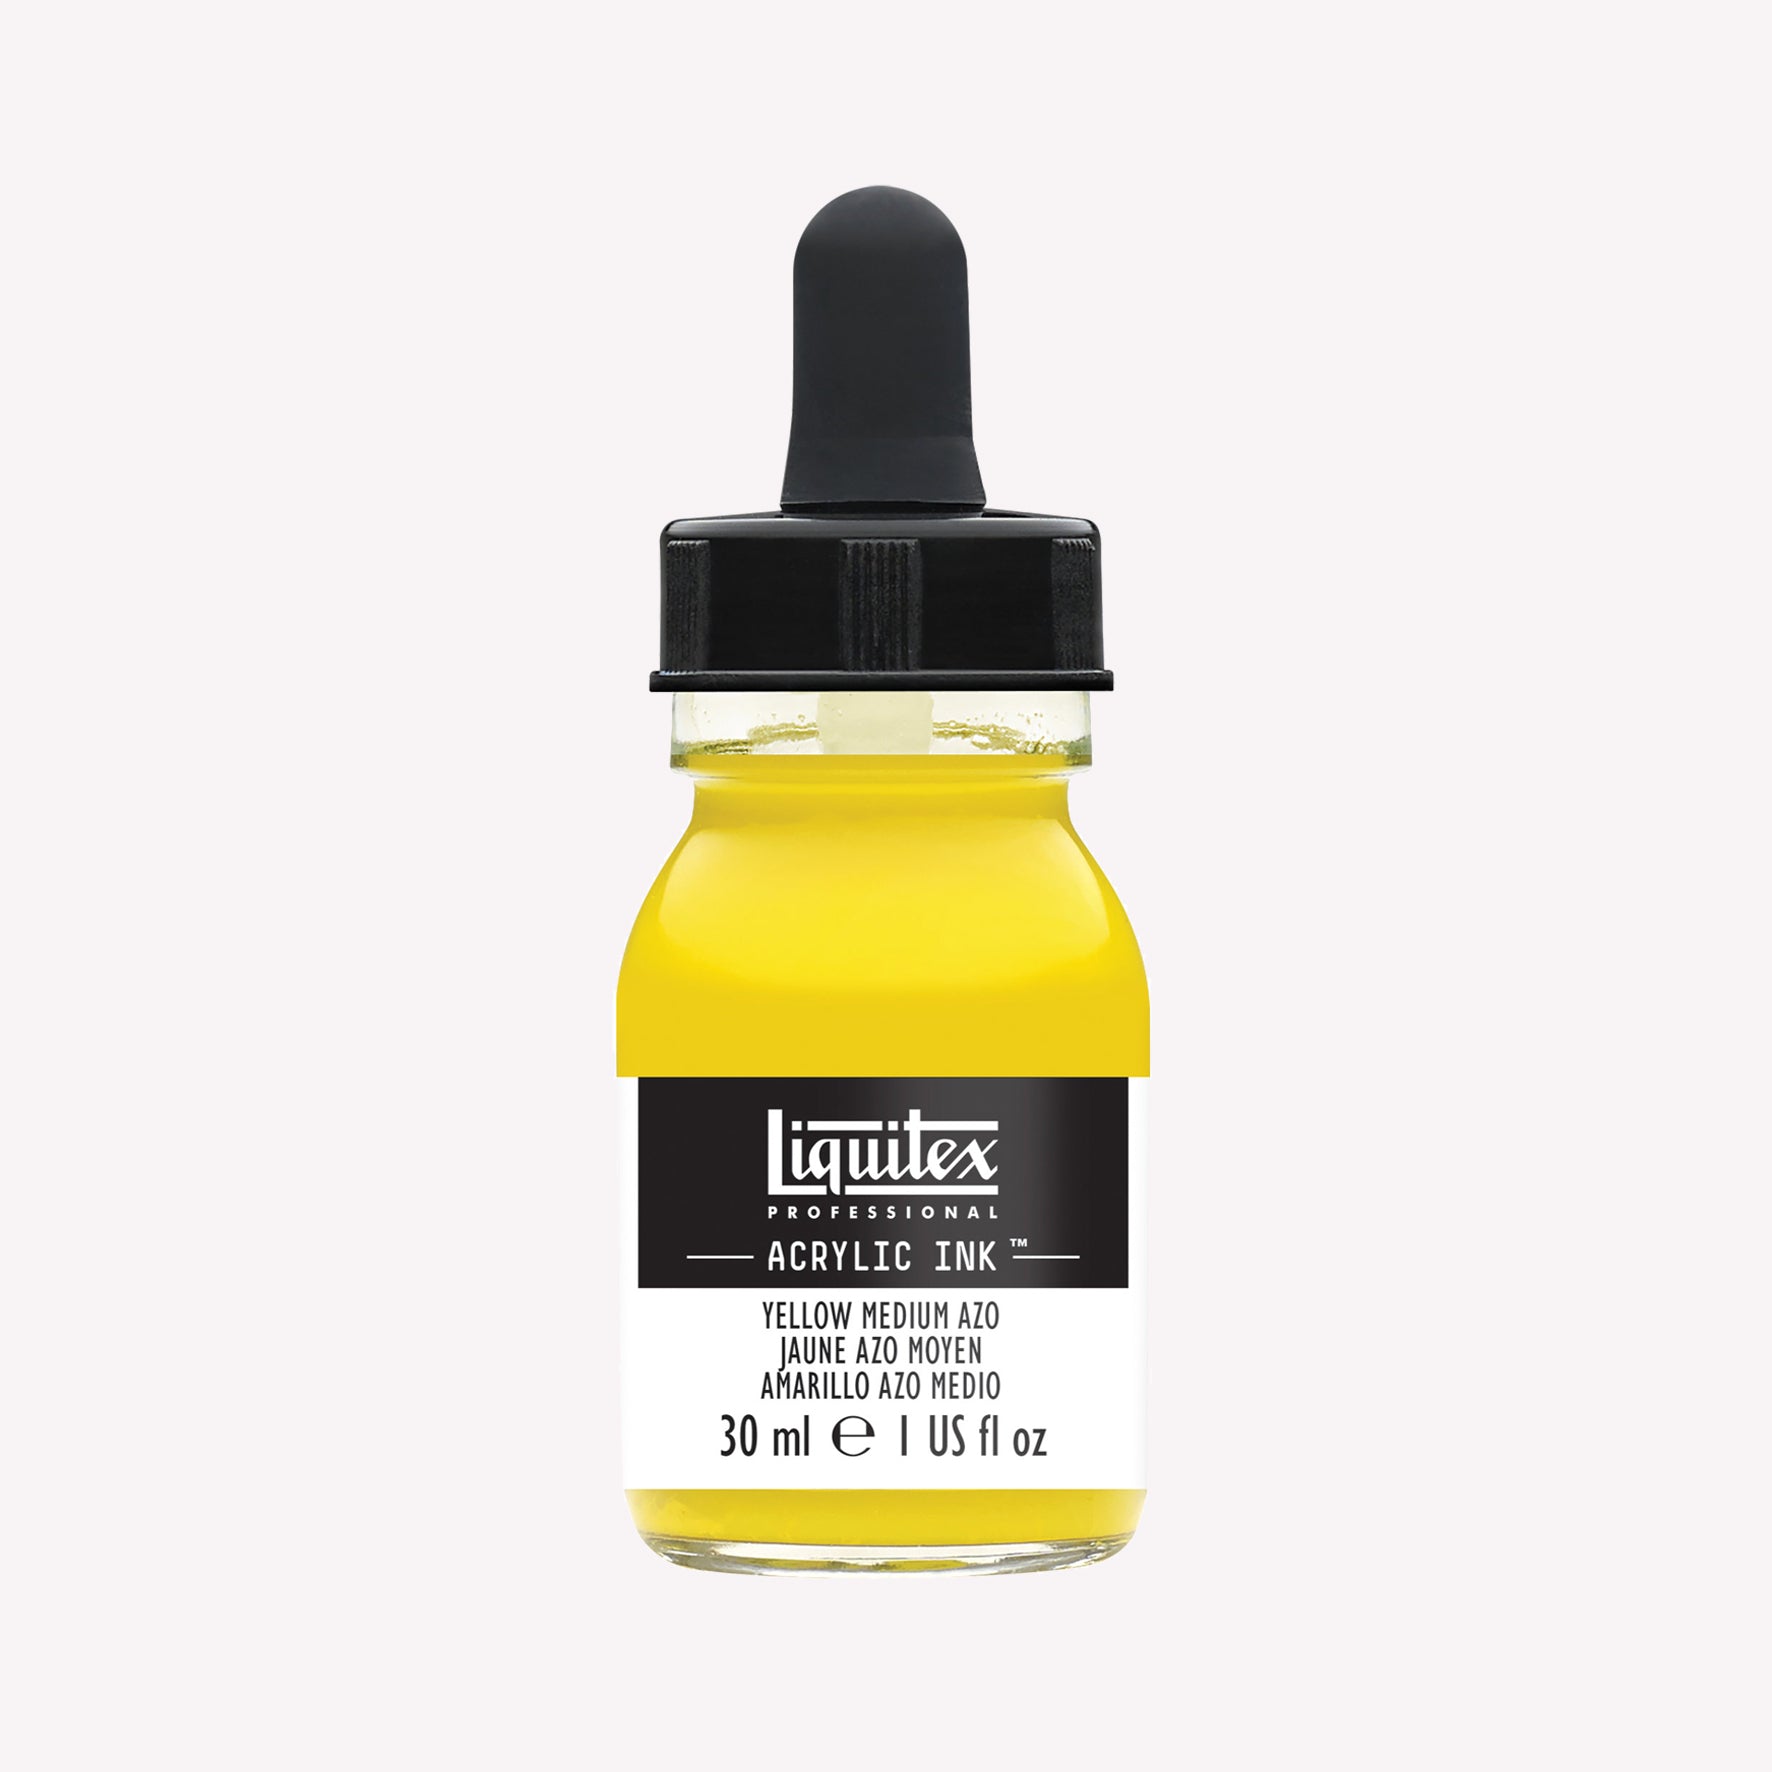 A 30ml glass jar of highly pigmented, artist-quality acrylic ink in the shade Yellow Medium Azo with a pipette lid. Made by Liquitex. 